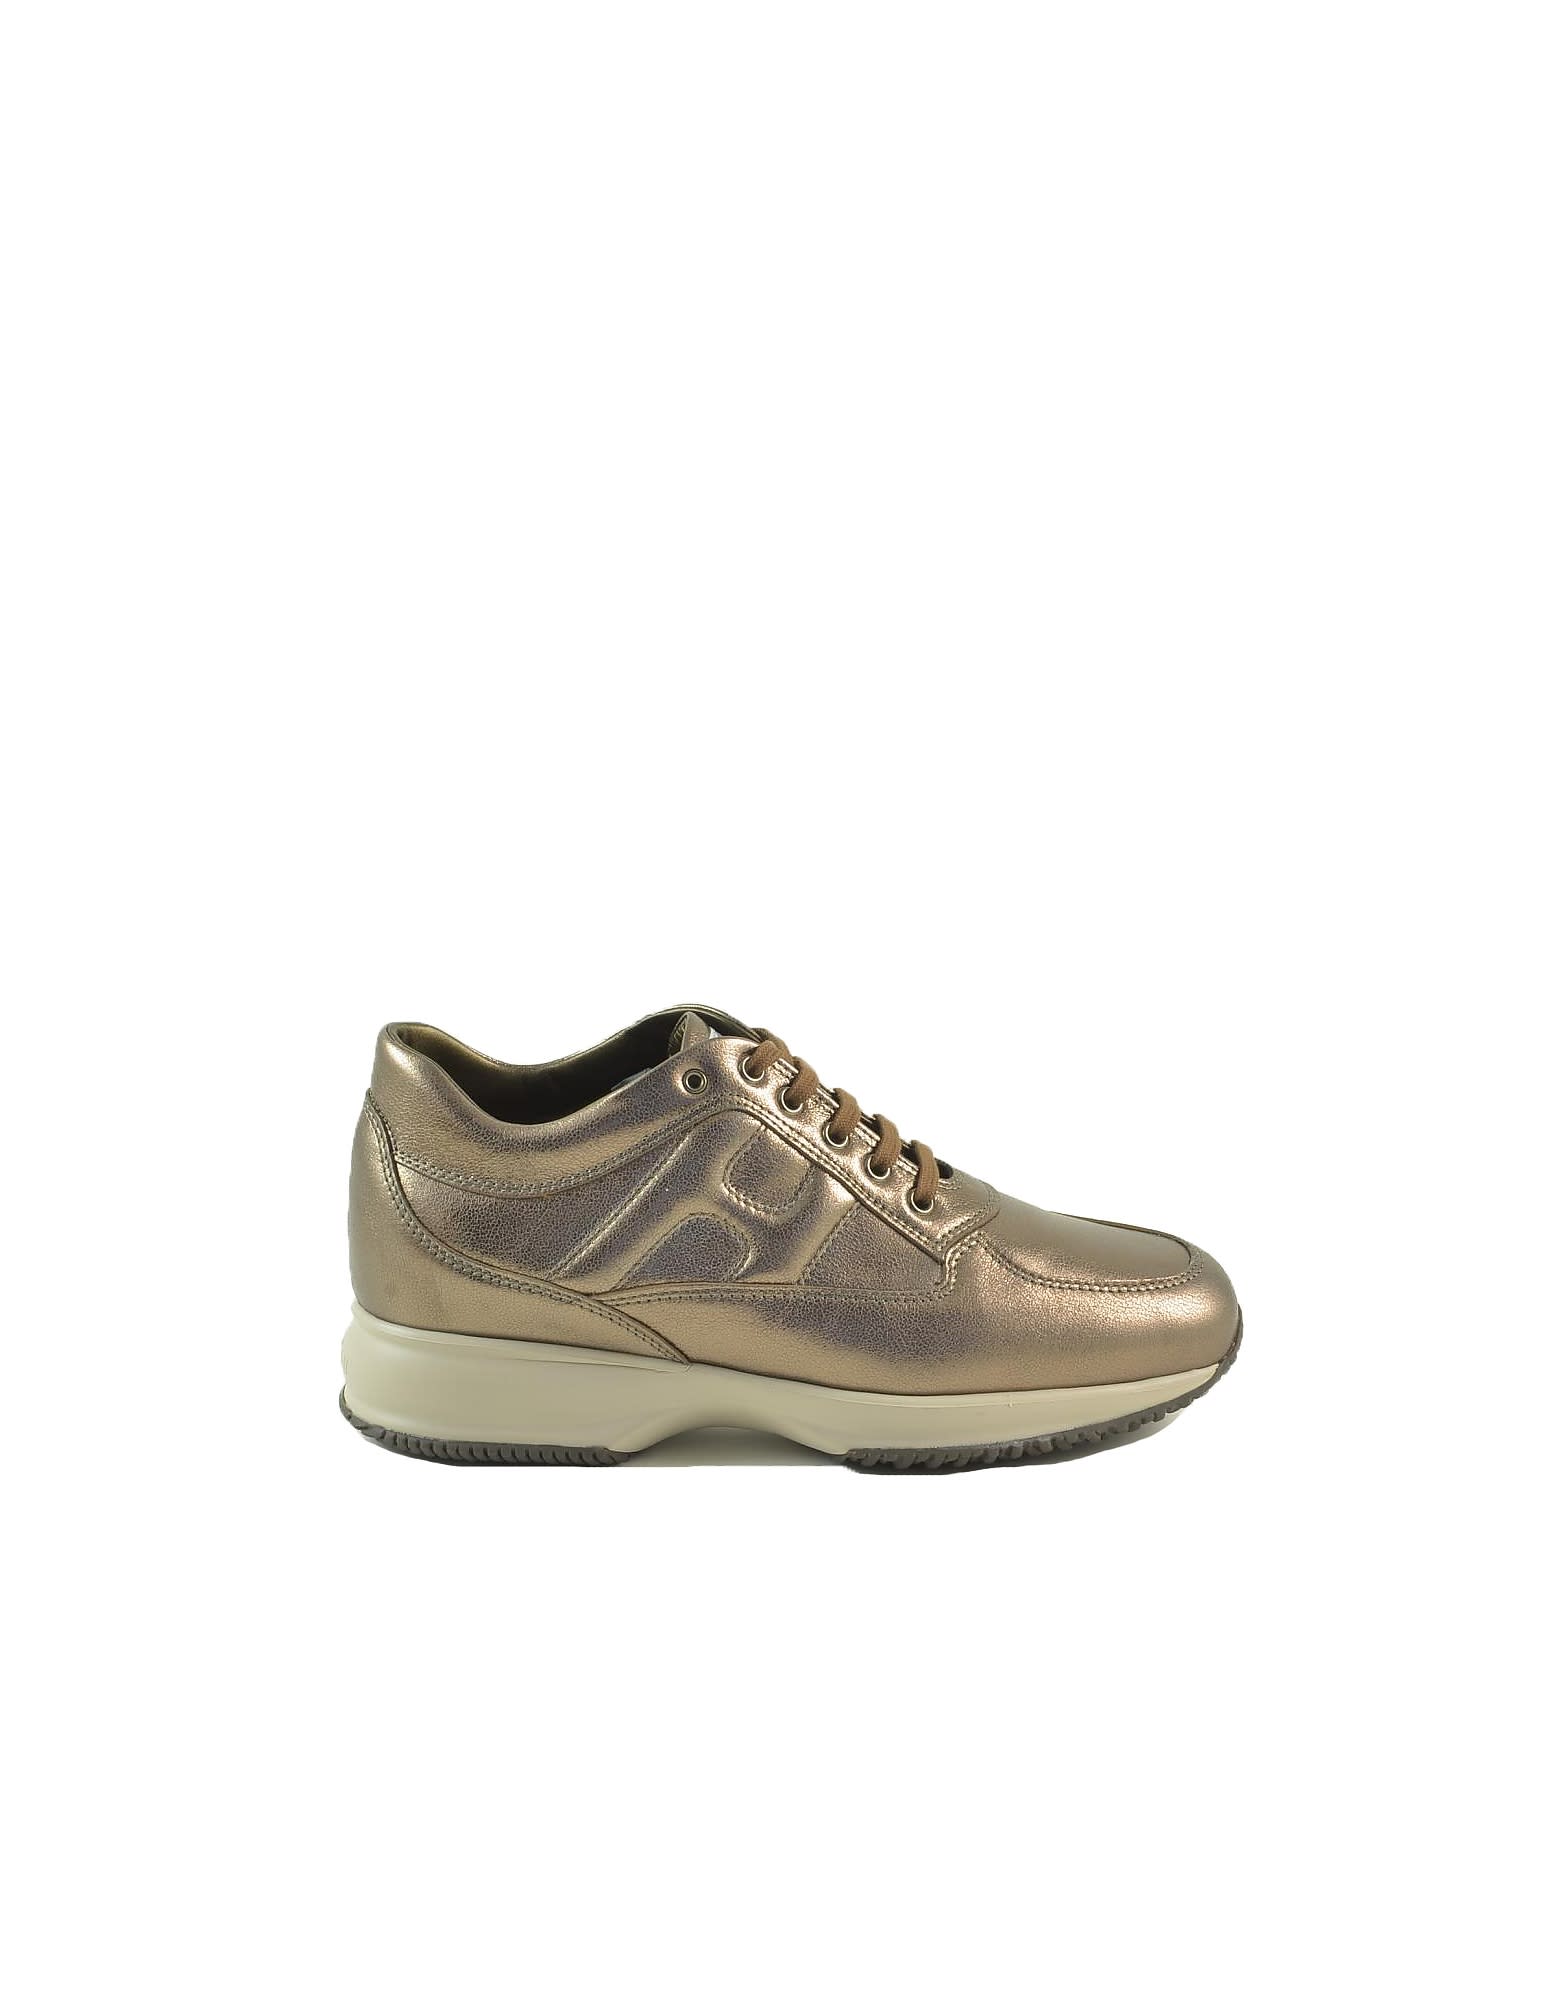 Hogan Bronze Laminated Leather Womens Sneakers